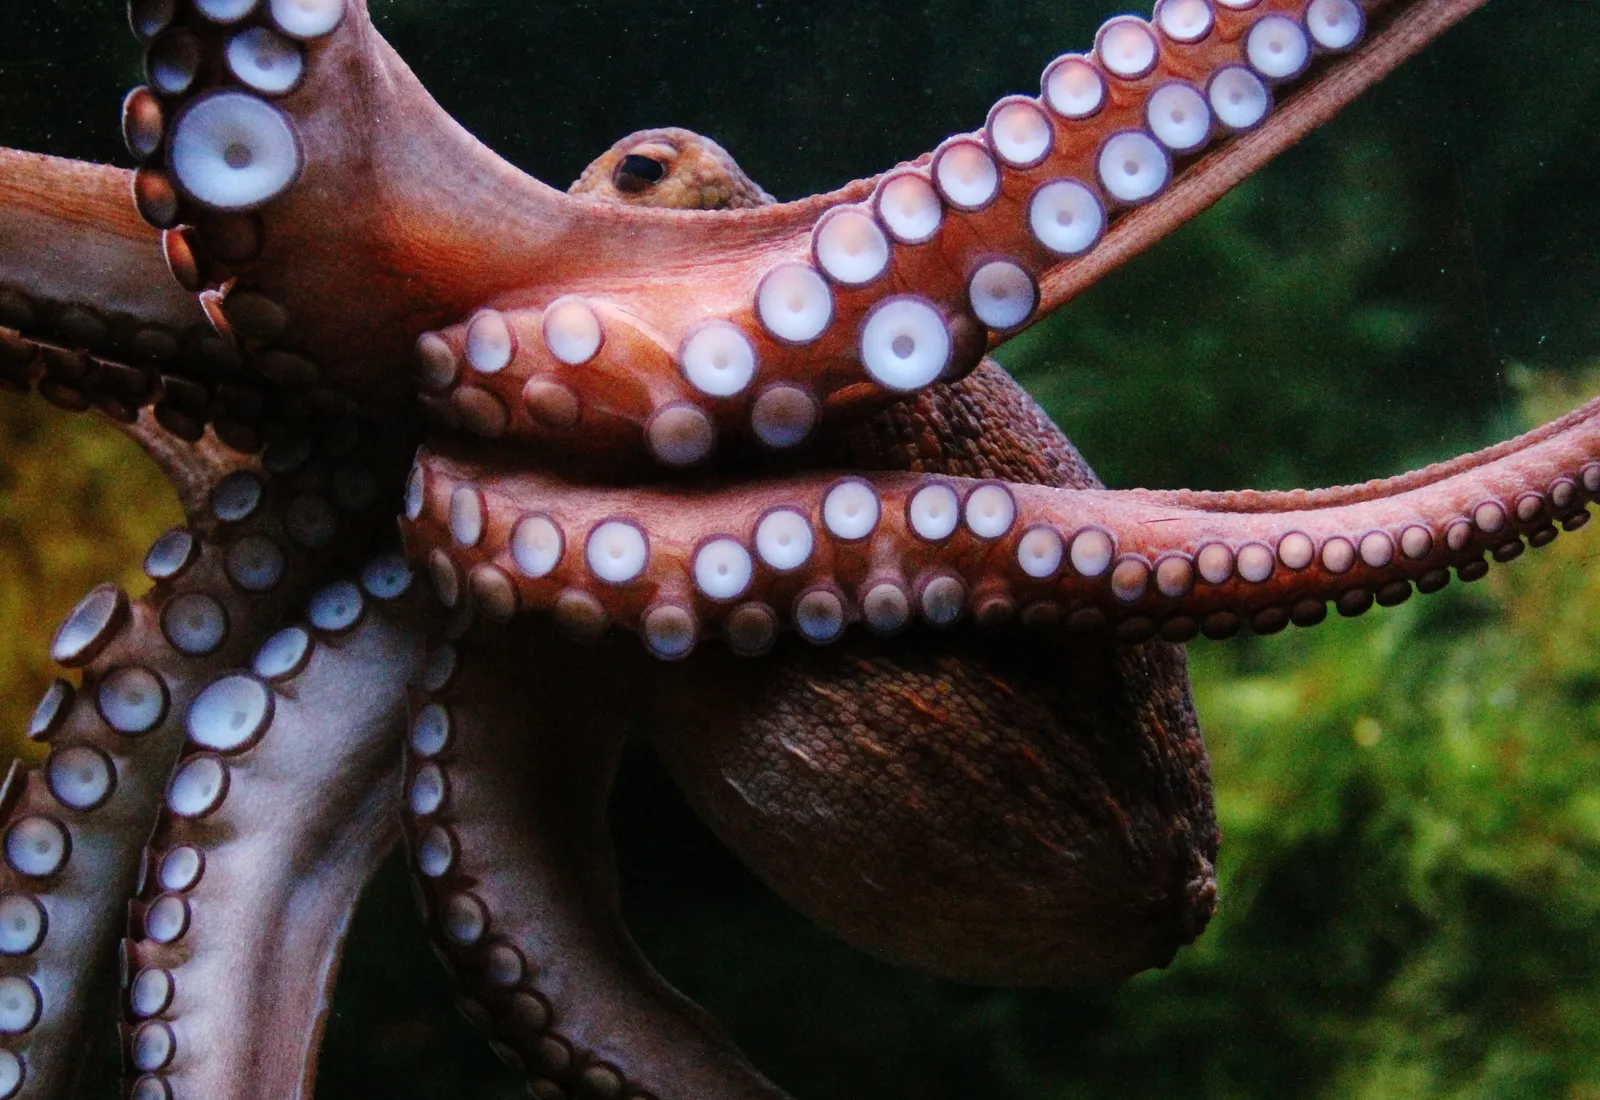 Ten Wild Facts About Octopuses: They Have Three Hearts, Big Brains